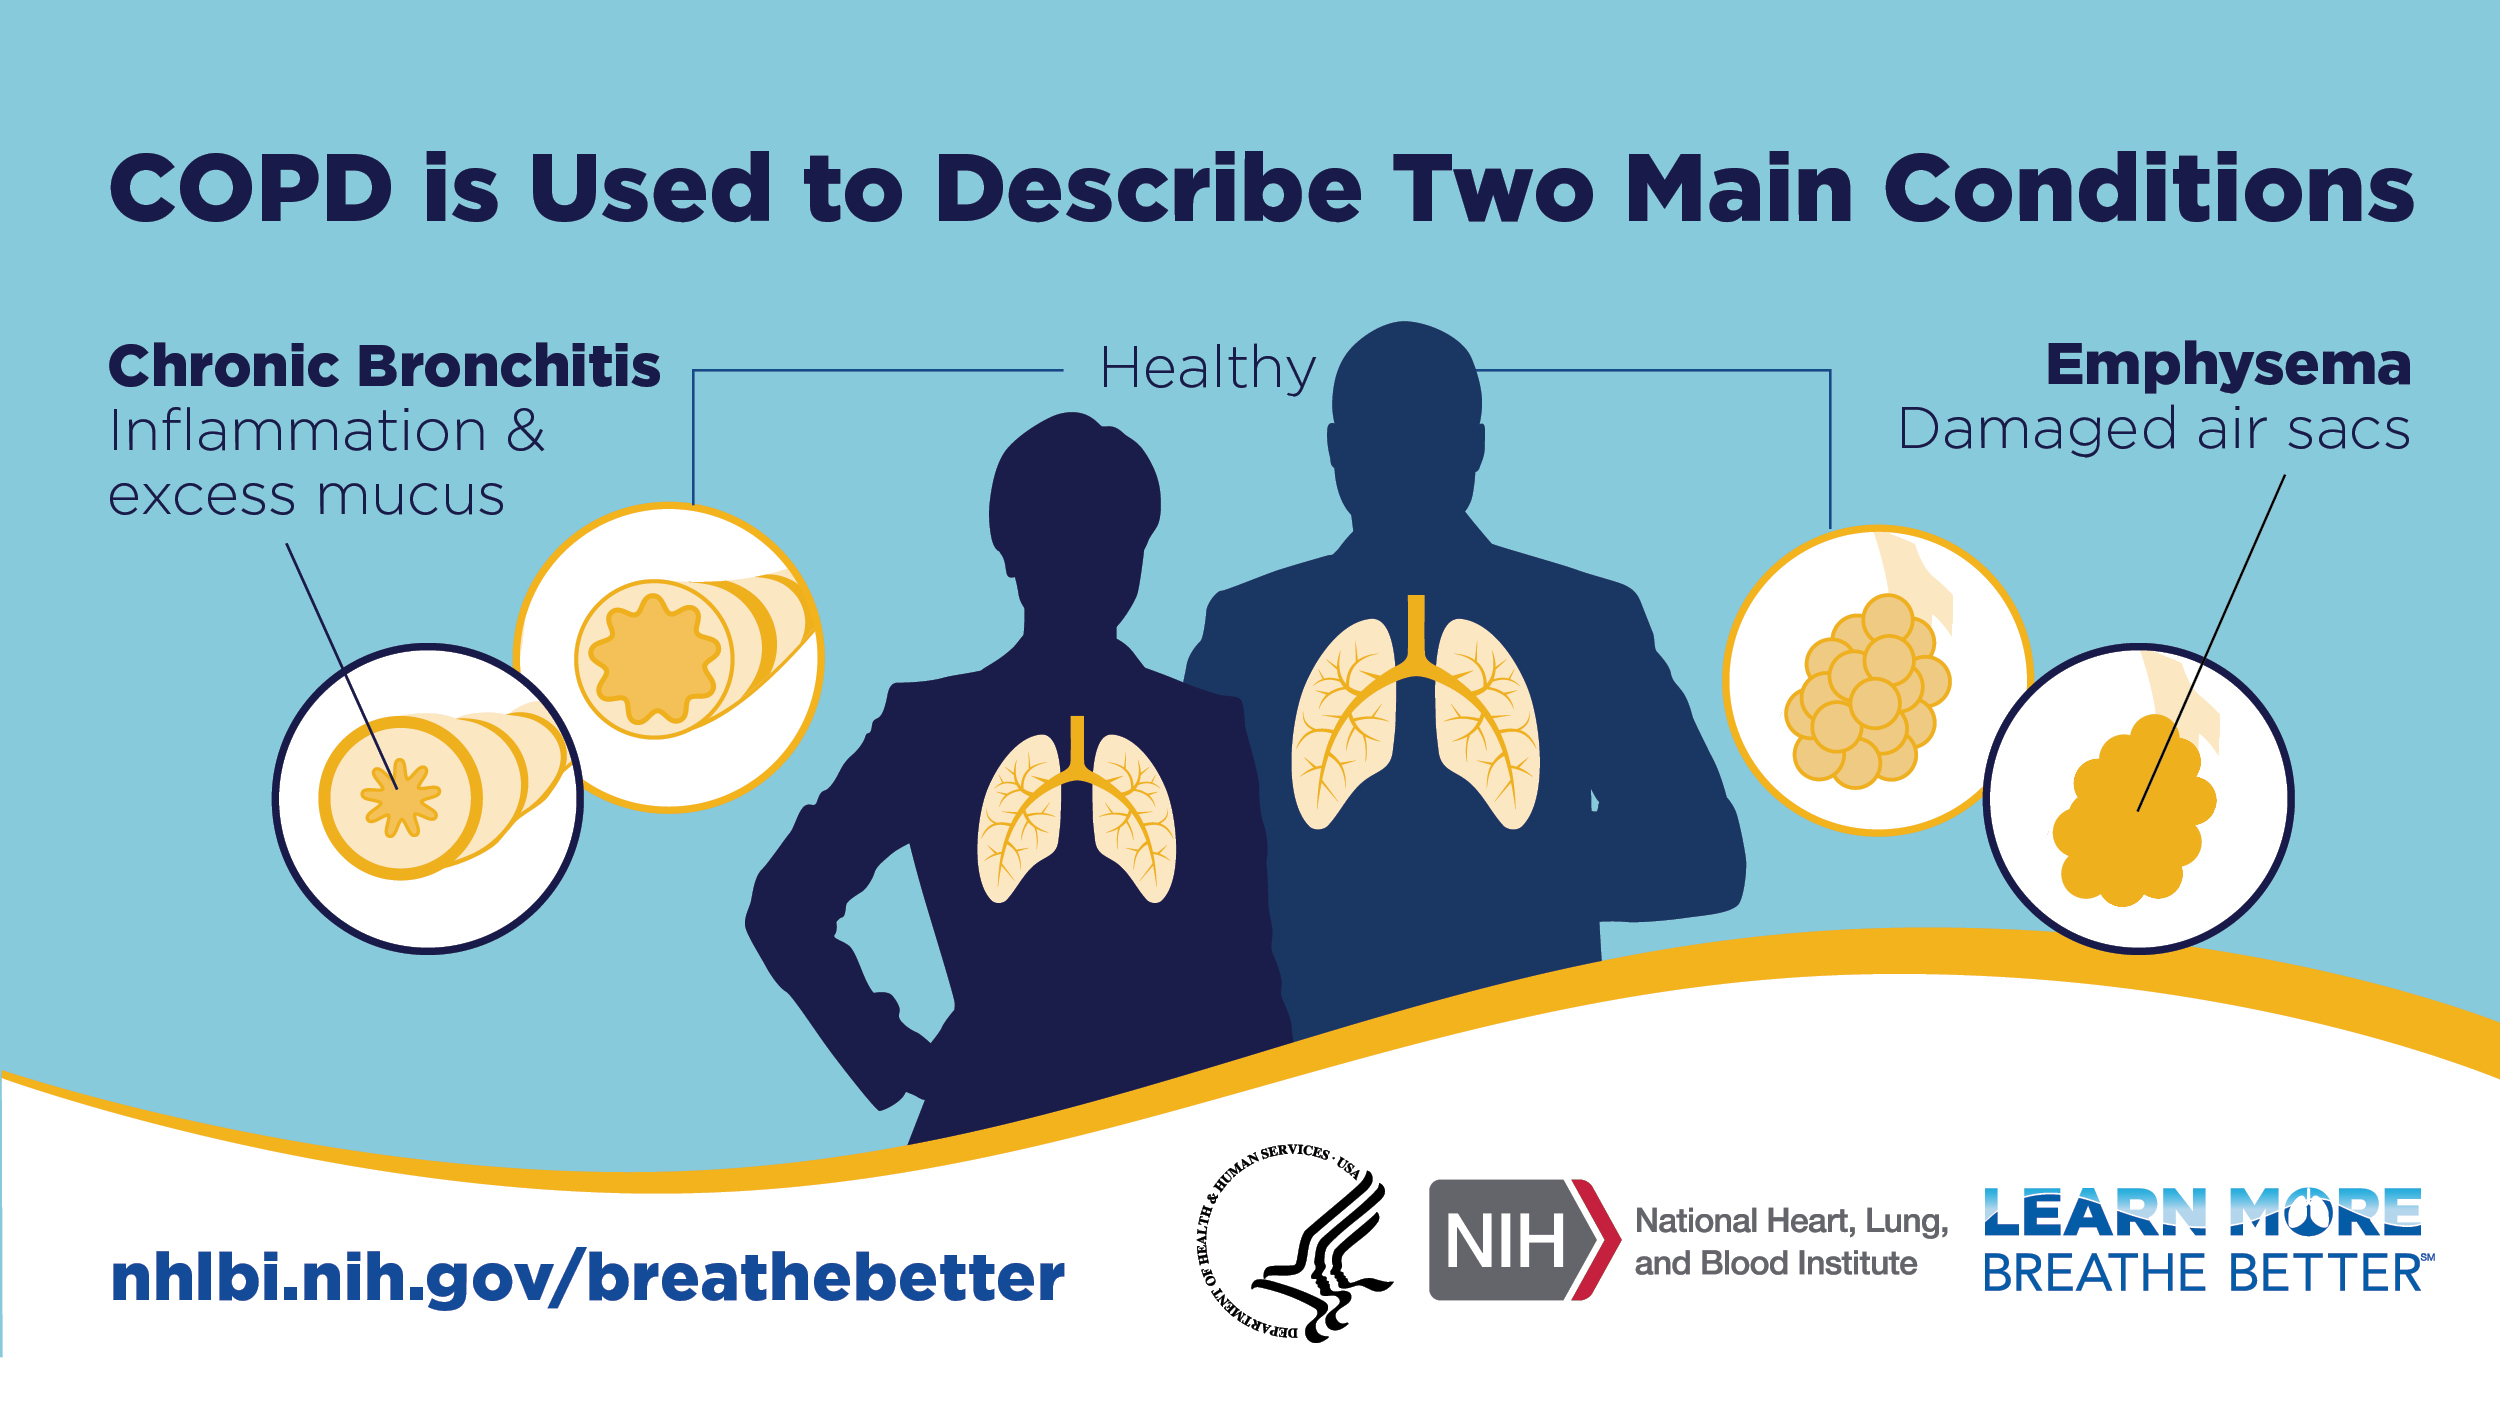 COPD conditions